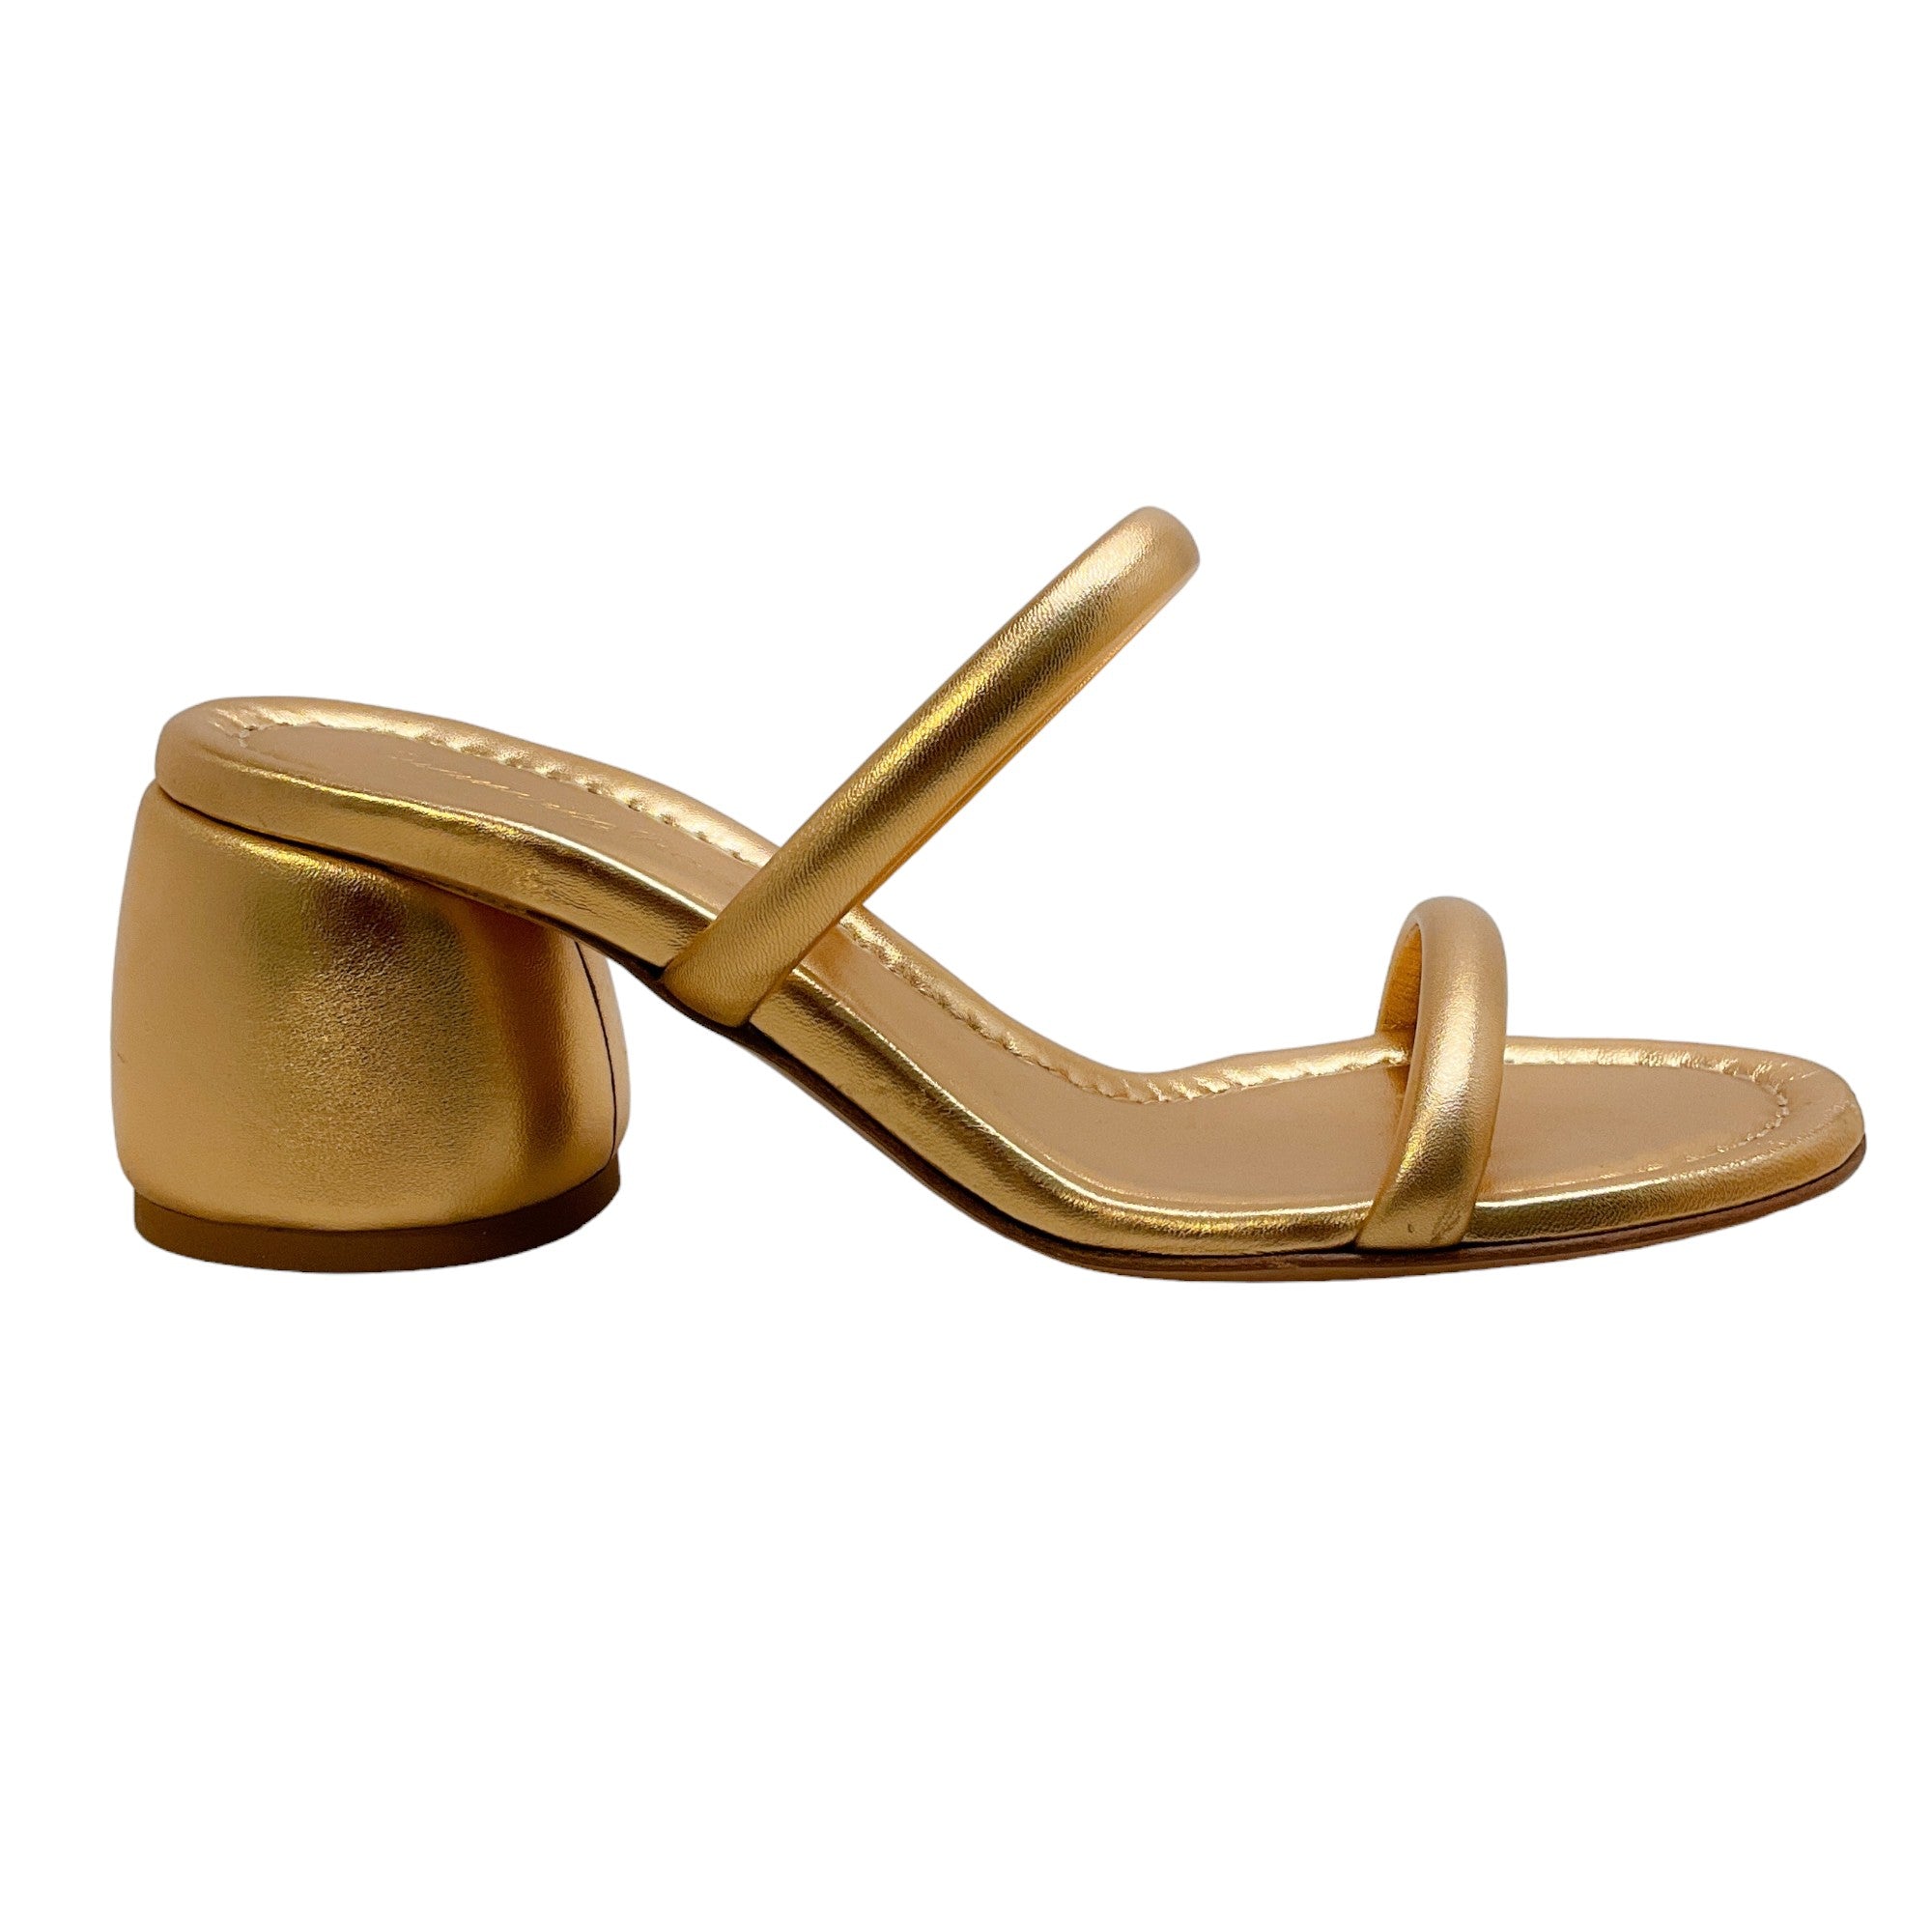 Gianvito Rossi Gold Metallic Leather Two Strap Sandals